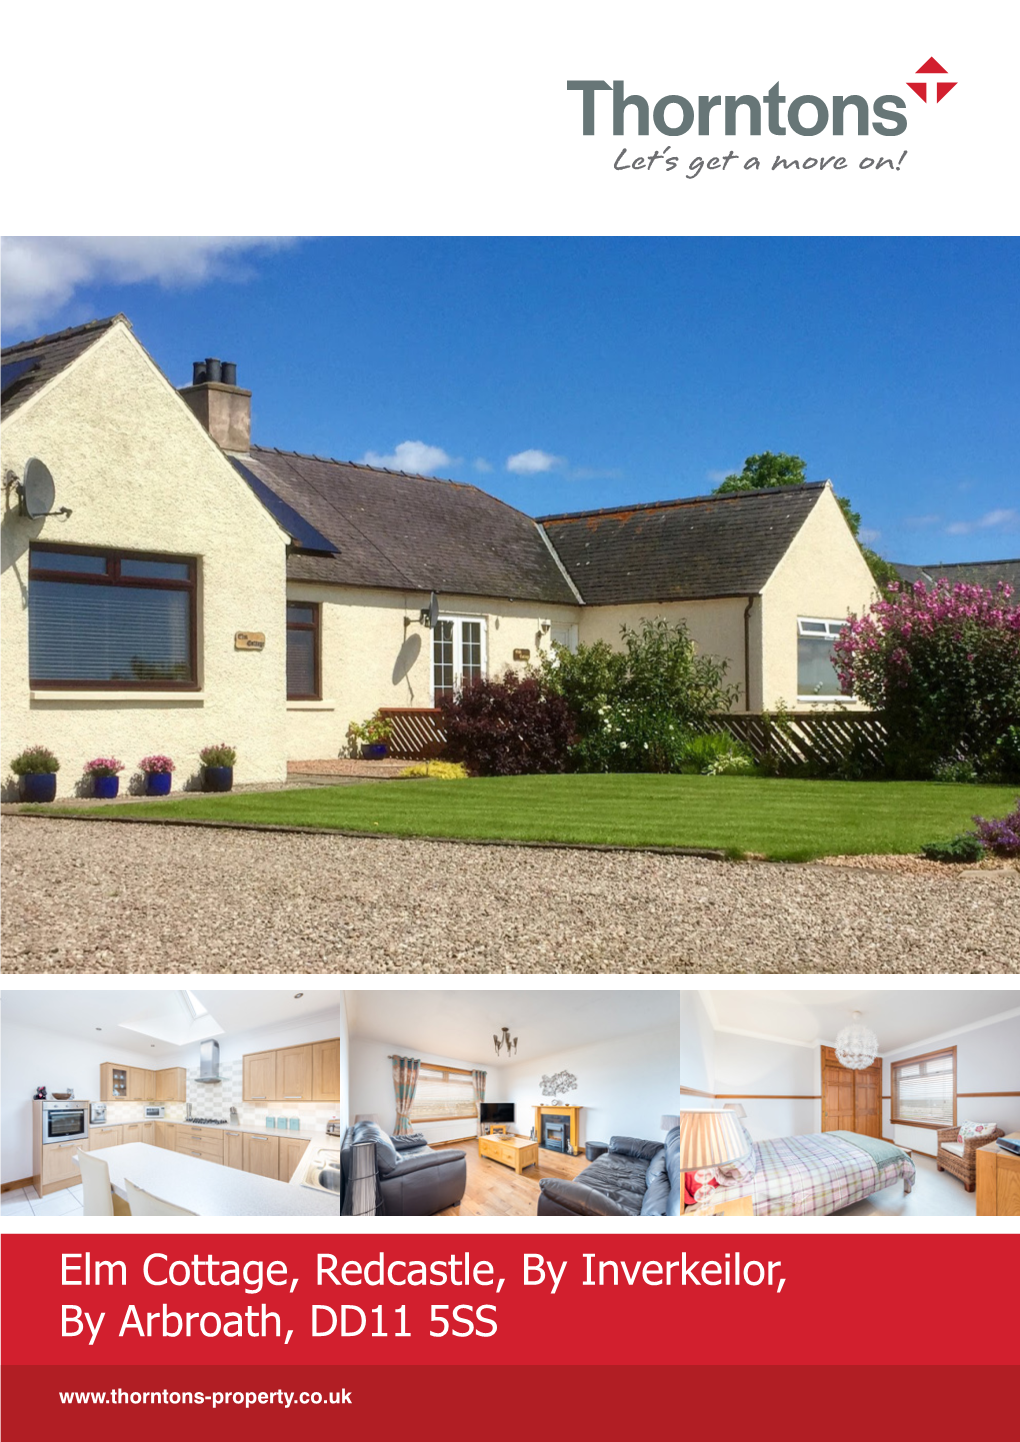 Elm Cottage, Redcastle, by Inverkeilor, by Arbroath, DD11